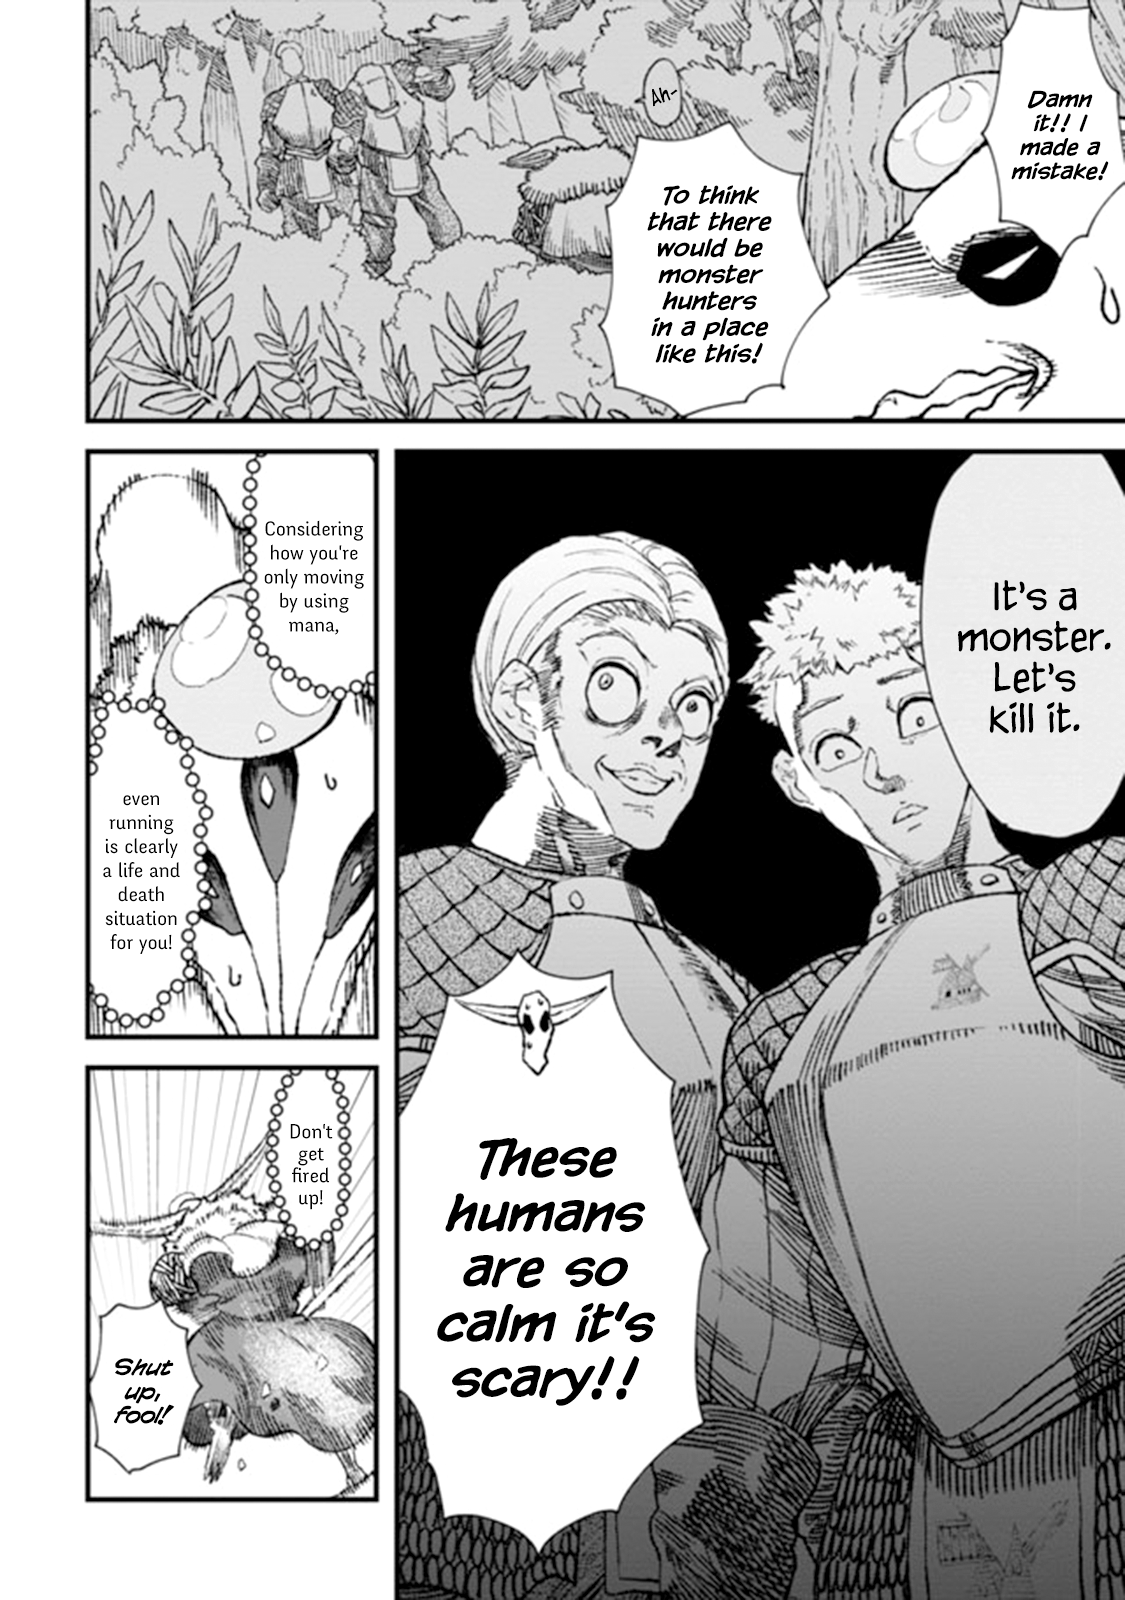 The Comeback Of The Demon King Who Formed A Demon's Guild After Being Vanquished By The Hero - Page 2